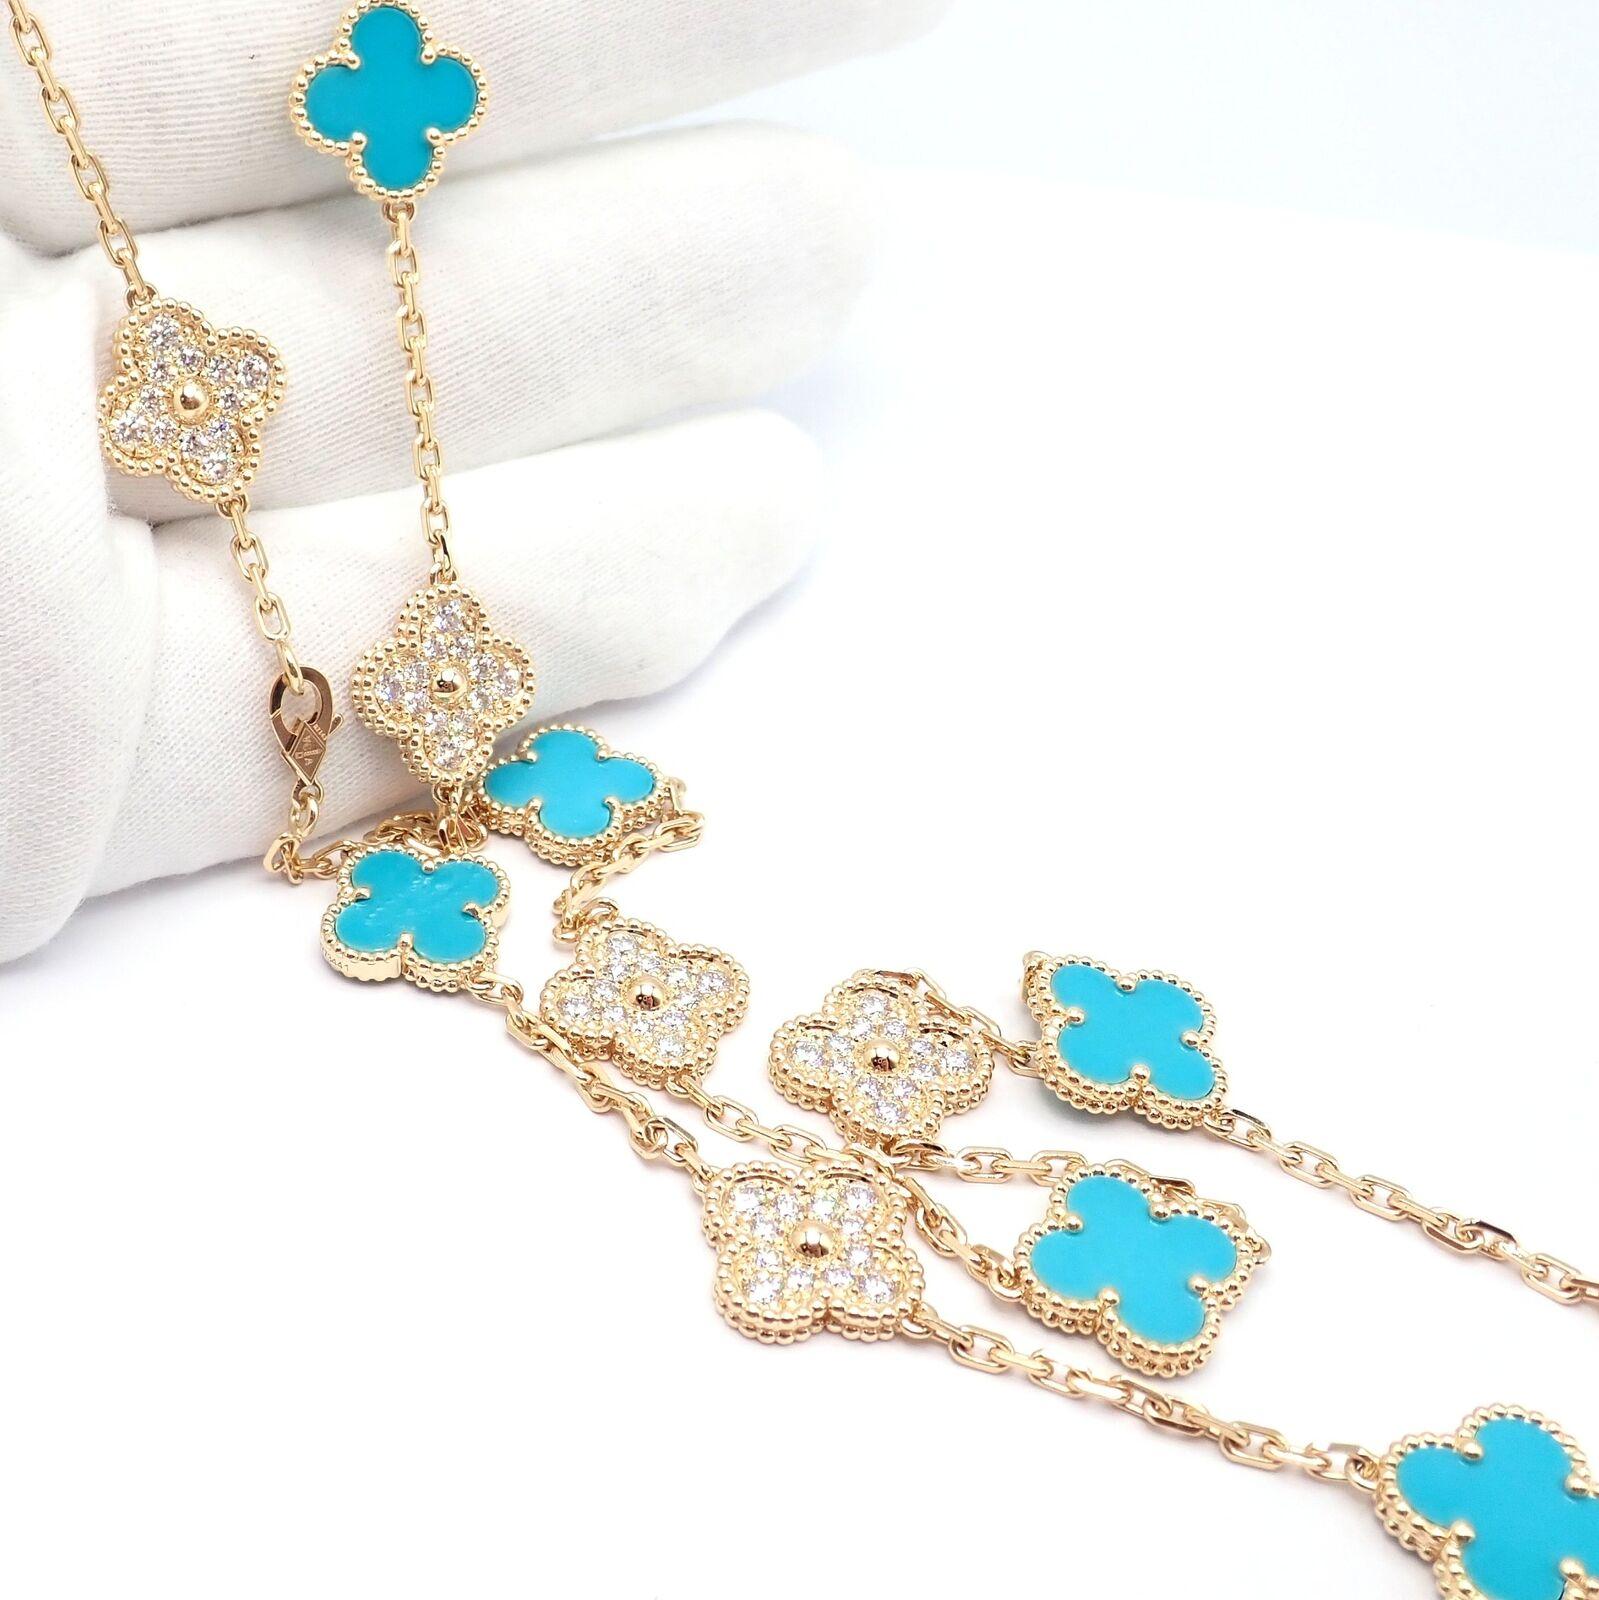 Van Cleef & Arpels 20 Motif Vintage Alhambra Diamond & Turquoise Gold Necklace In Excellent Condition For Sale In Holland, PA